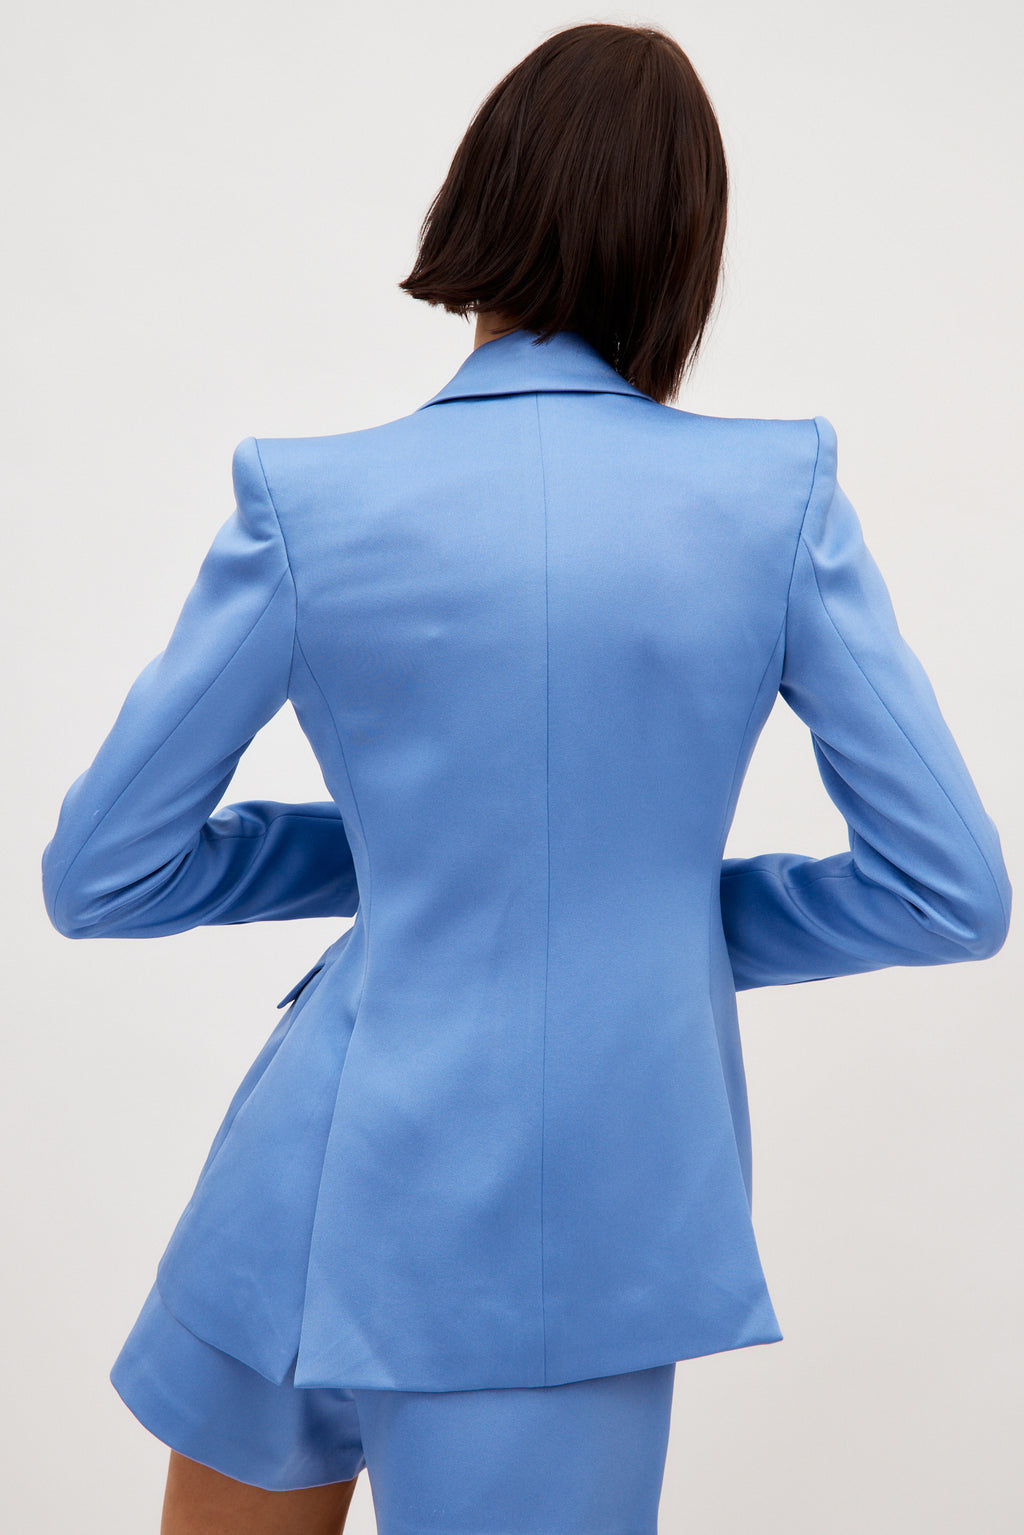 Satin Crepe Fitted Periwinkle Blazer